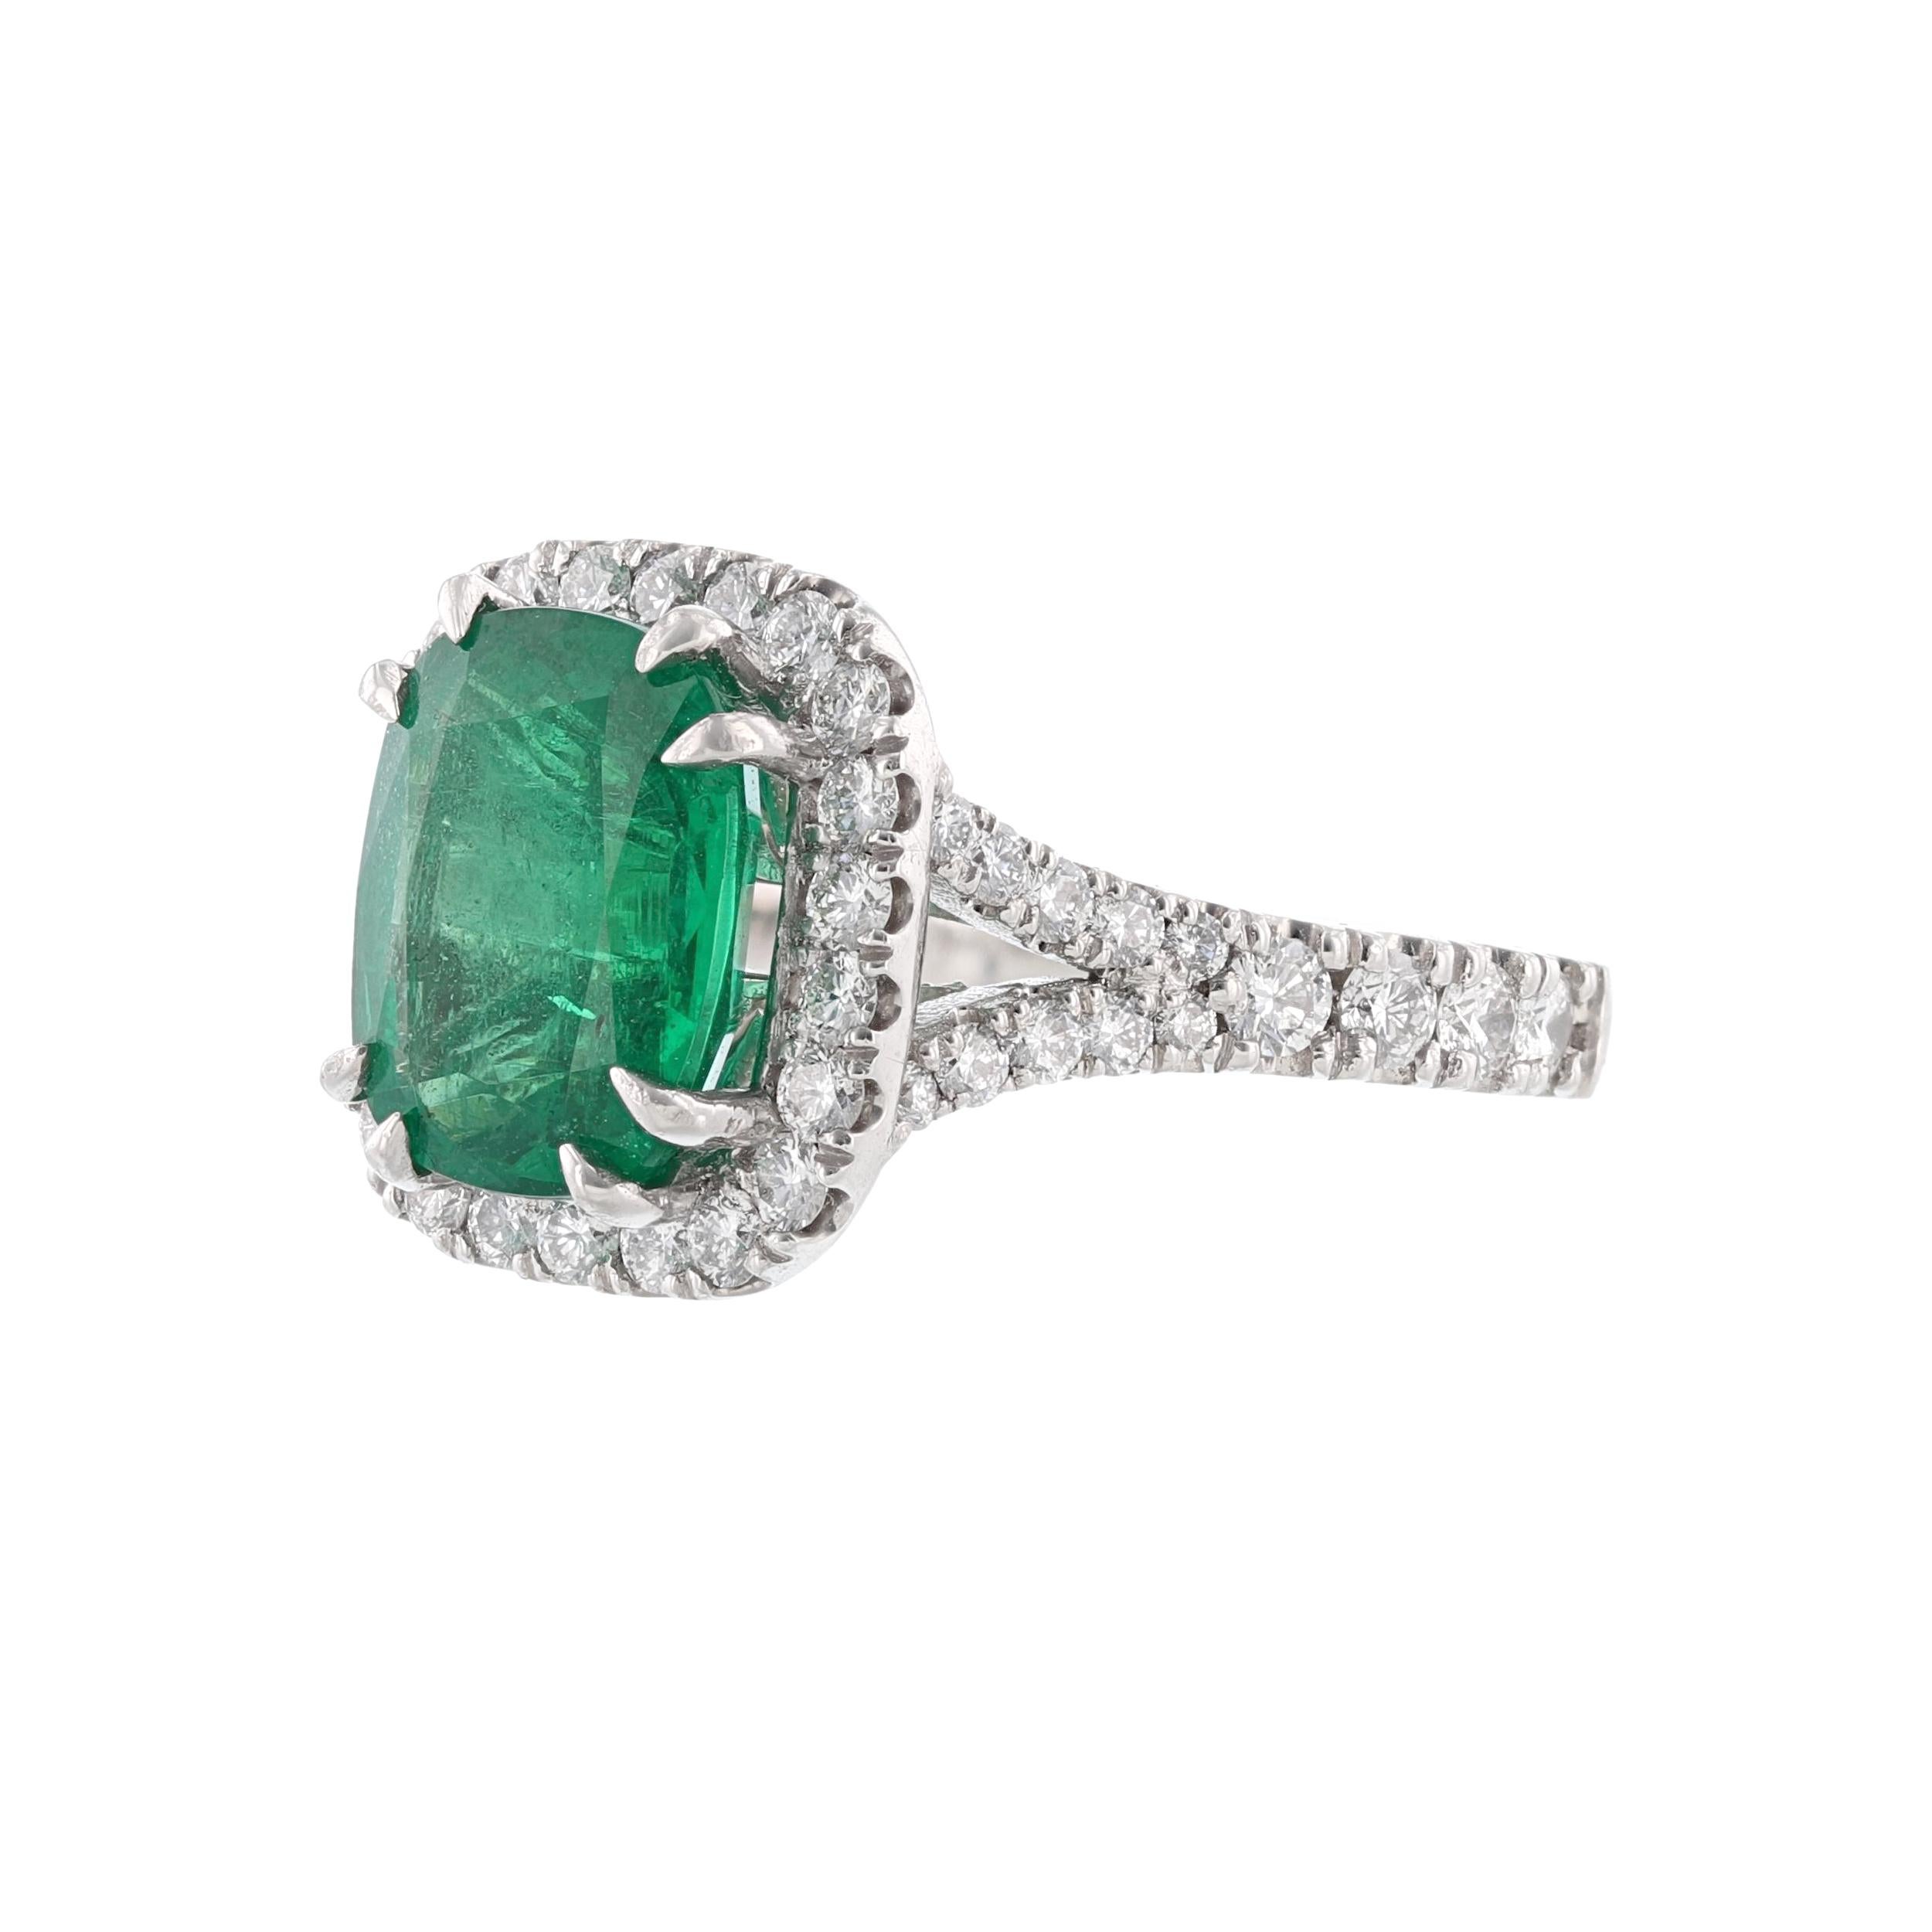 This ring is made in platinum and features 1 cushion cut natural beryl emerald weighing 3.85 carats. With a color grade (Green). The GIA Certification Number 5151329477. Also includes 60 round cut, prong set diamonds weighing  1.35 carats. With a